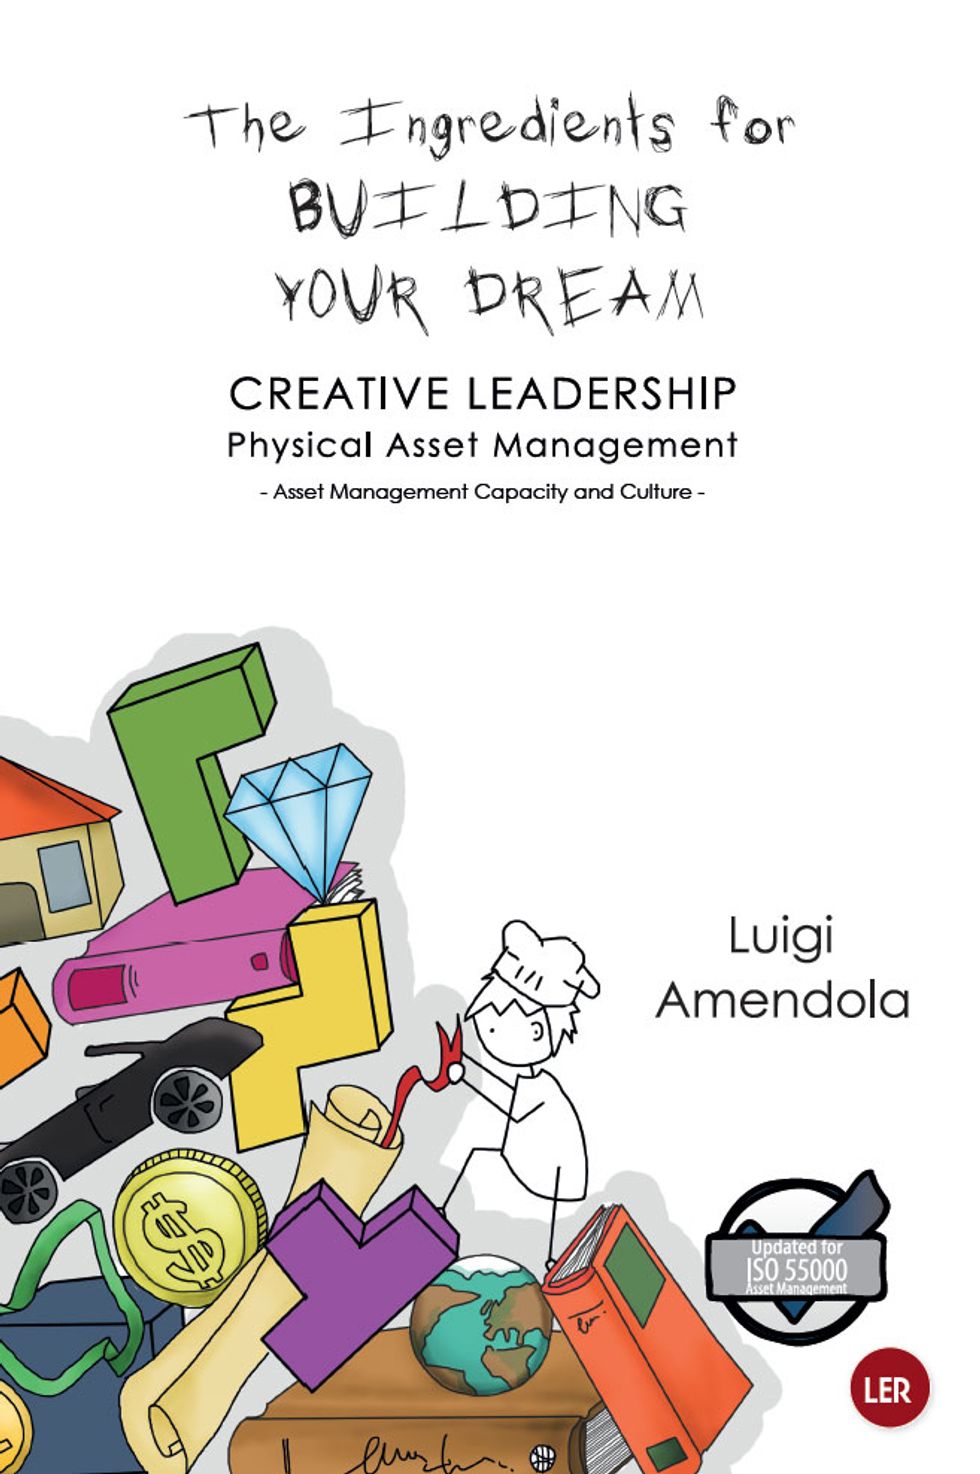  The Ingredients for Building Your Dream: Creative Leadership 